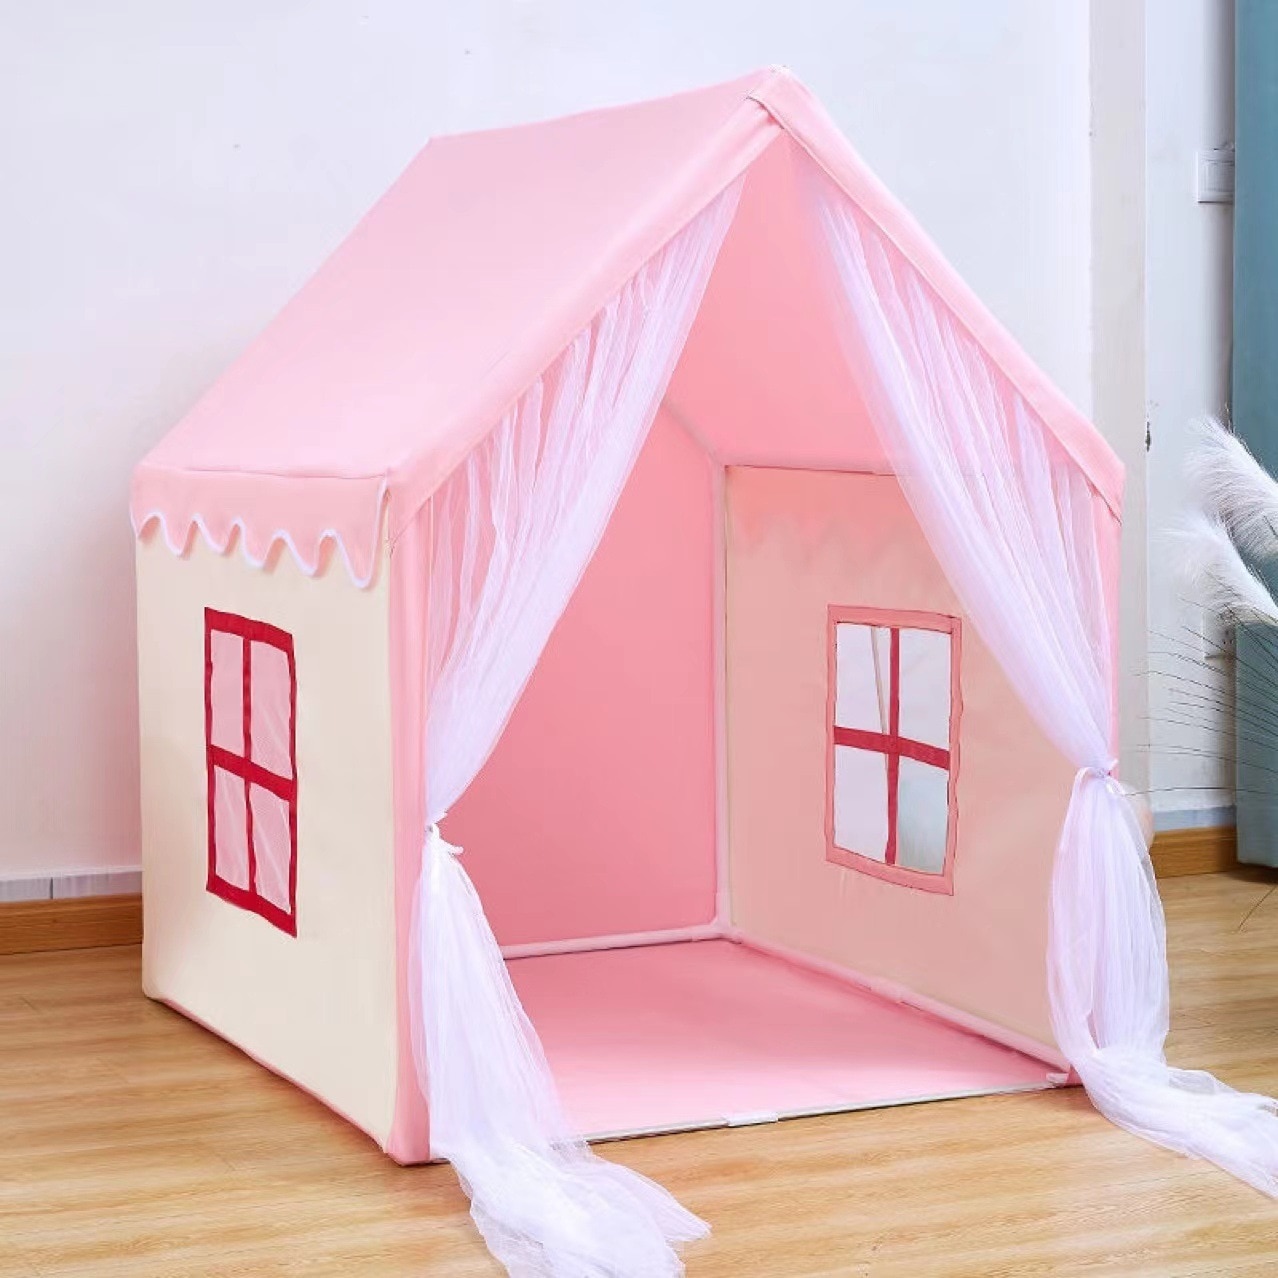 New-Baby-Tent-Children-s-Home-Girl-s-Small-House-Children-s-Entertainment-Game-House-Baby-3